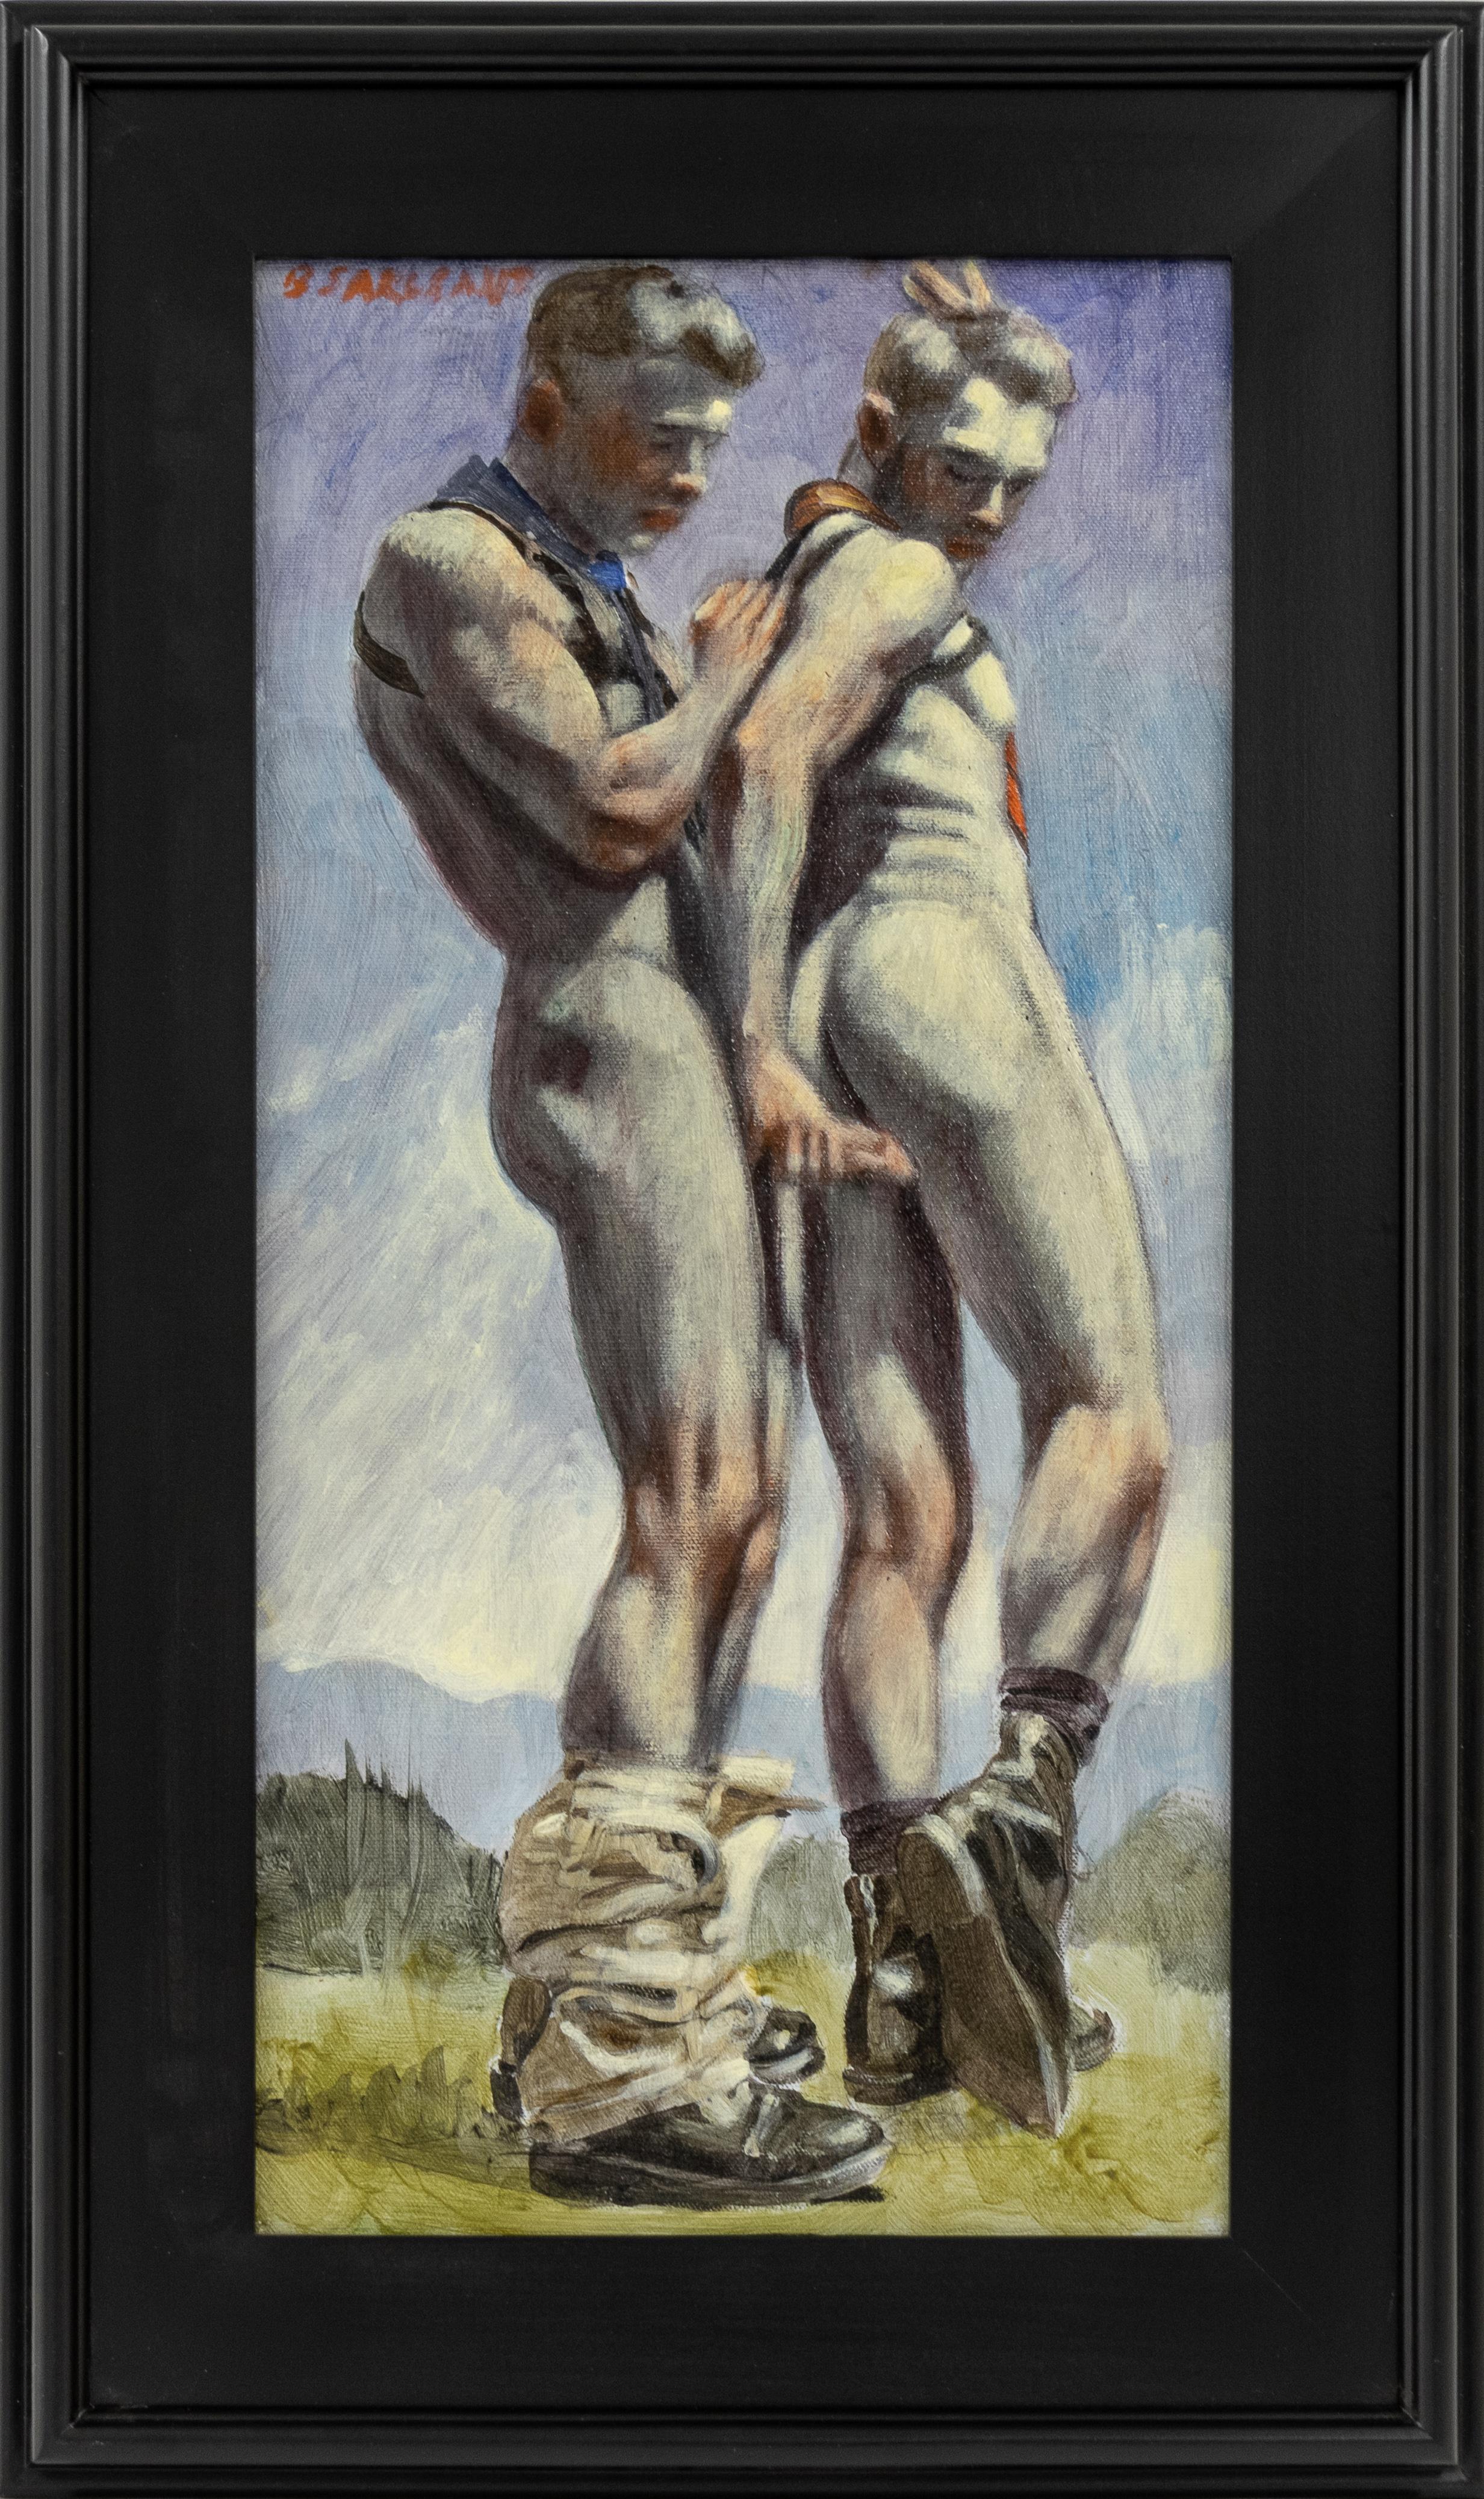 [Bruce Sargeant (1898-1938)] One Man Behind Another - Painting by Mark Beard